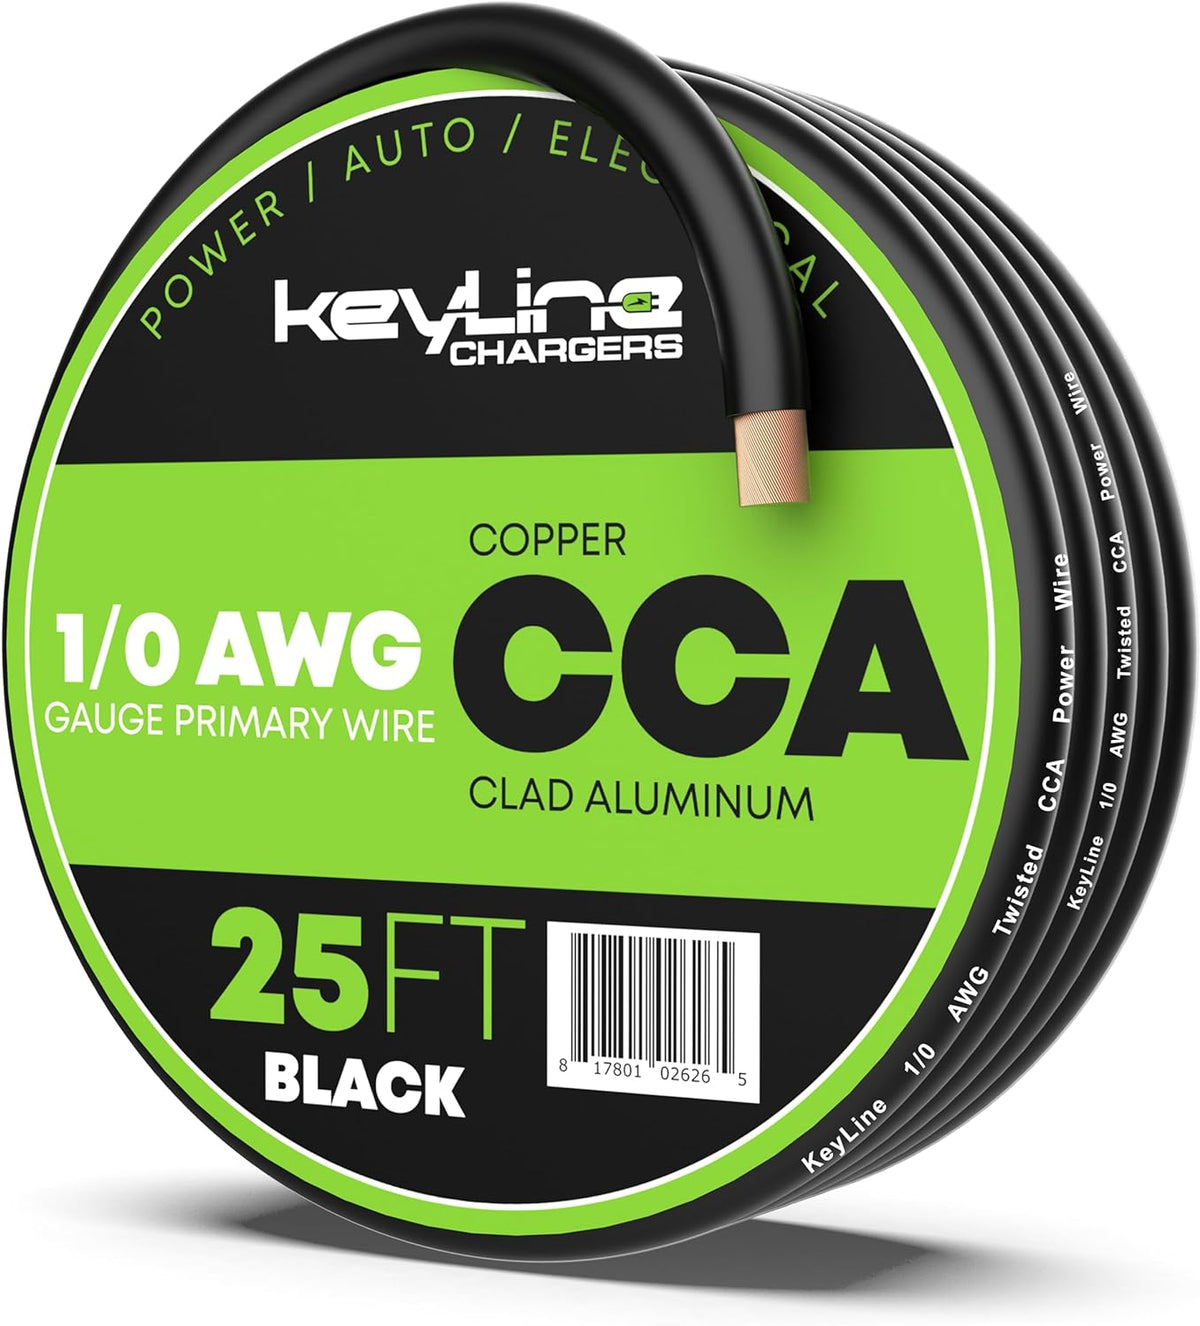 1/0 Gauge Wire - 25ft Black | 1/0 Gauge Amp Wire, Battery Cable, Marine Speaker Wire, Solar Cables for RV Trailer, Car Audio Speaker Cable, 8 AWG Automotive Wire Copper Clad Aluminum (CCA)